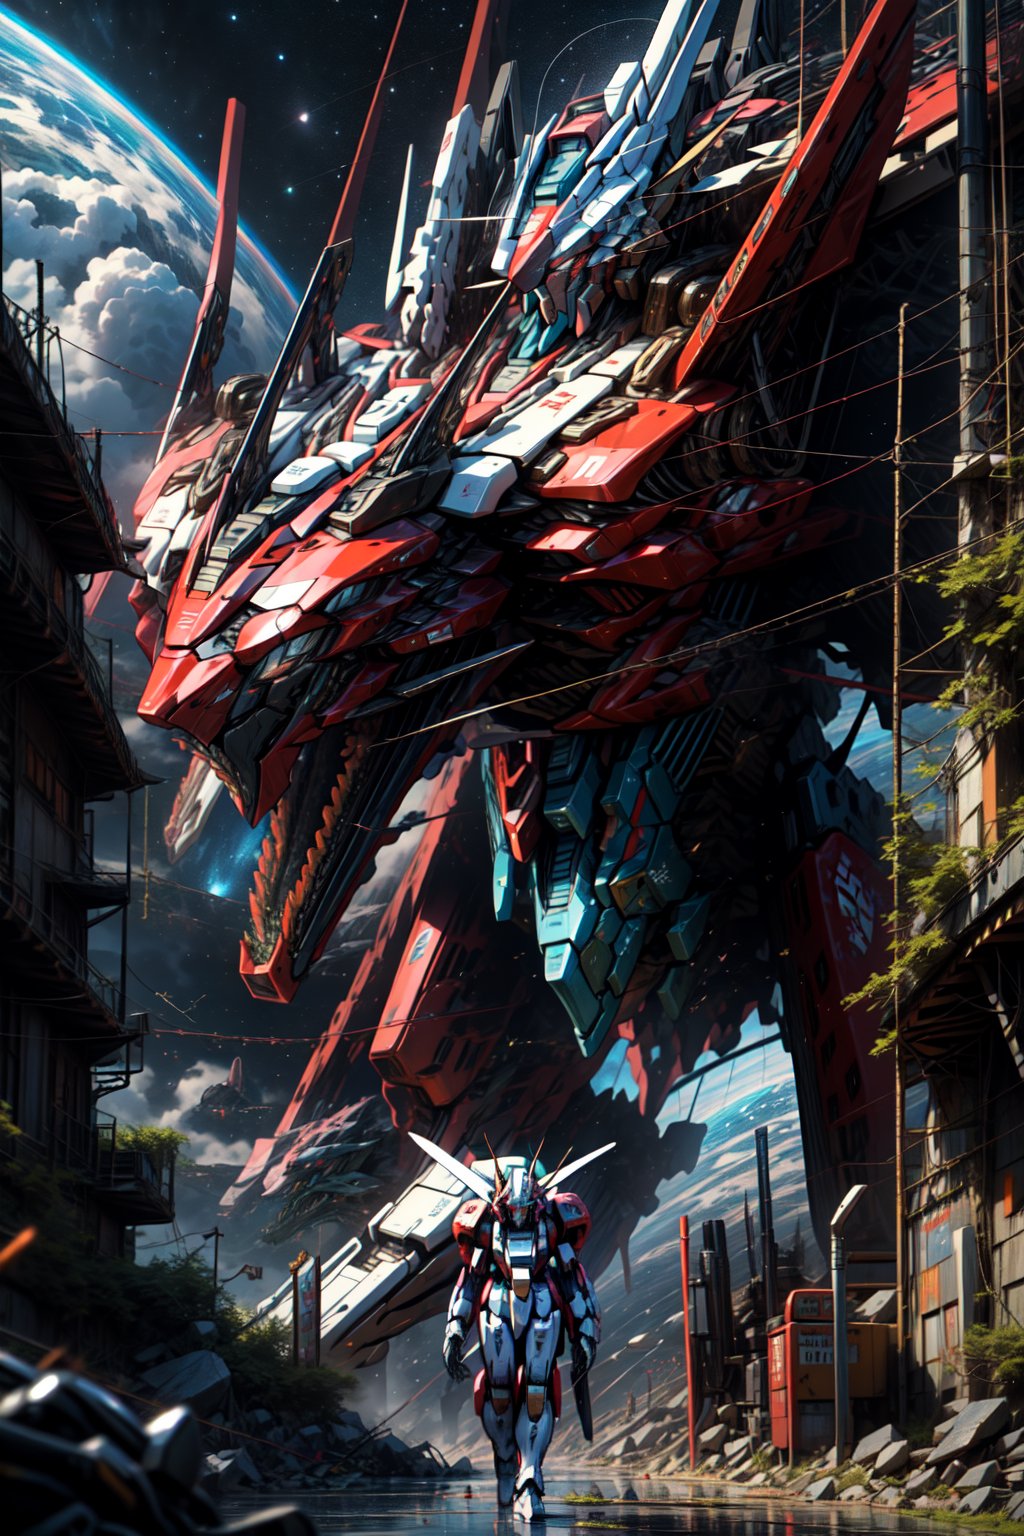 (masterpiece, best quality), [space, background, highly detailed, cosmic horror, glitching, monster mech floating in space, cinematic, final battle, ((dynamic showdown, prismatic sky)), (eldritch mecha):mecha age, prismatic sky, black hole, dark:16],weapon,mecha musume,Mechanical_tentacles,mecha,Science Fiction,robot,gundam,Mecha,